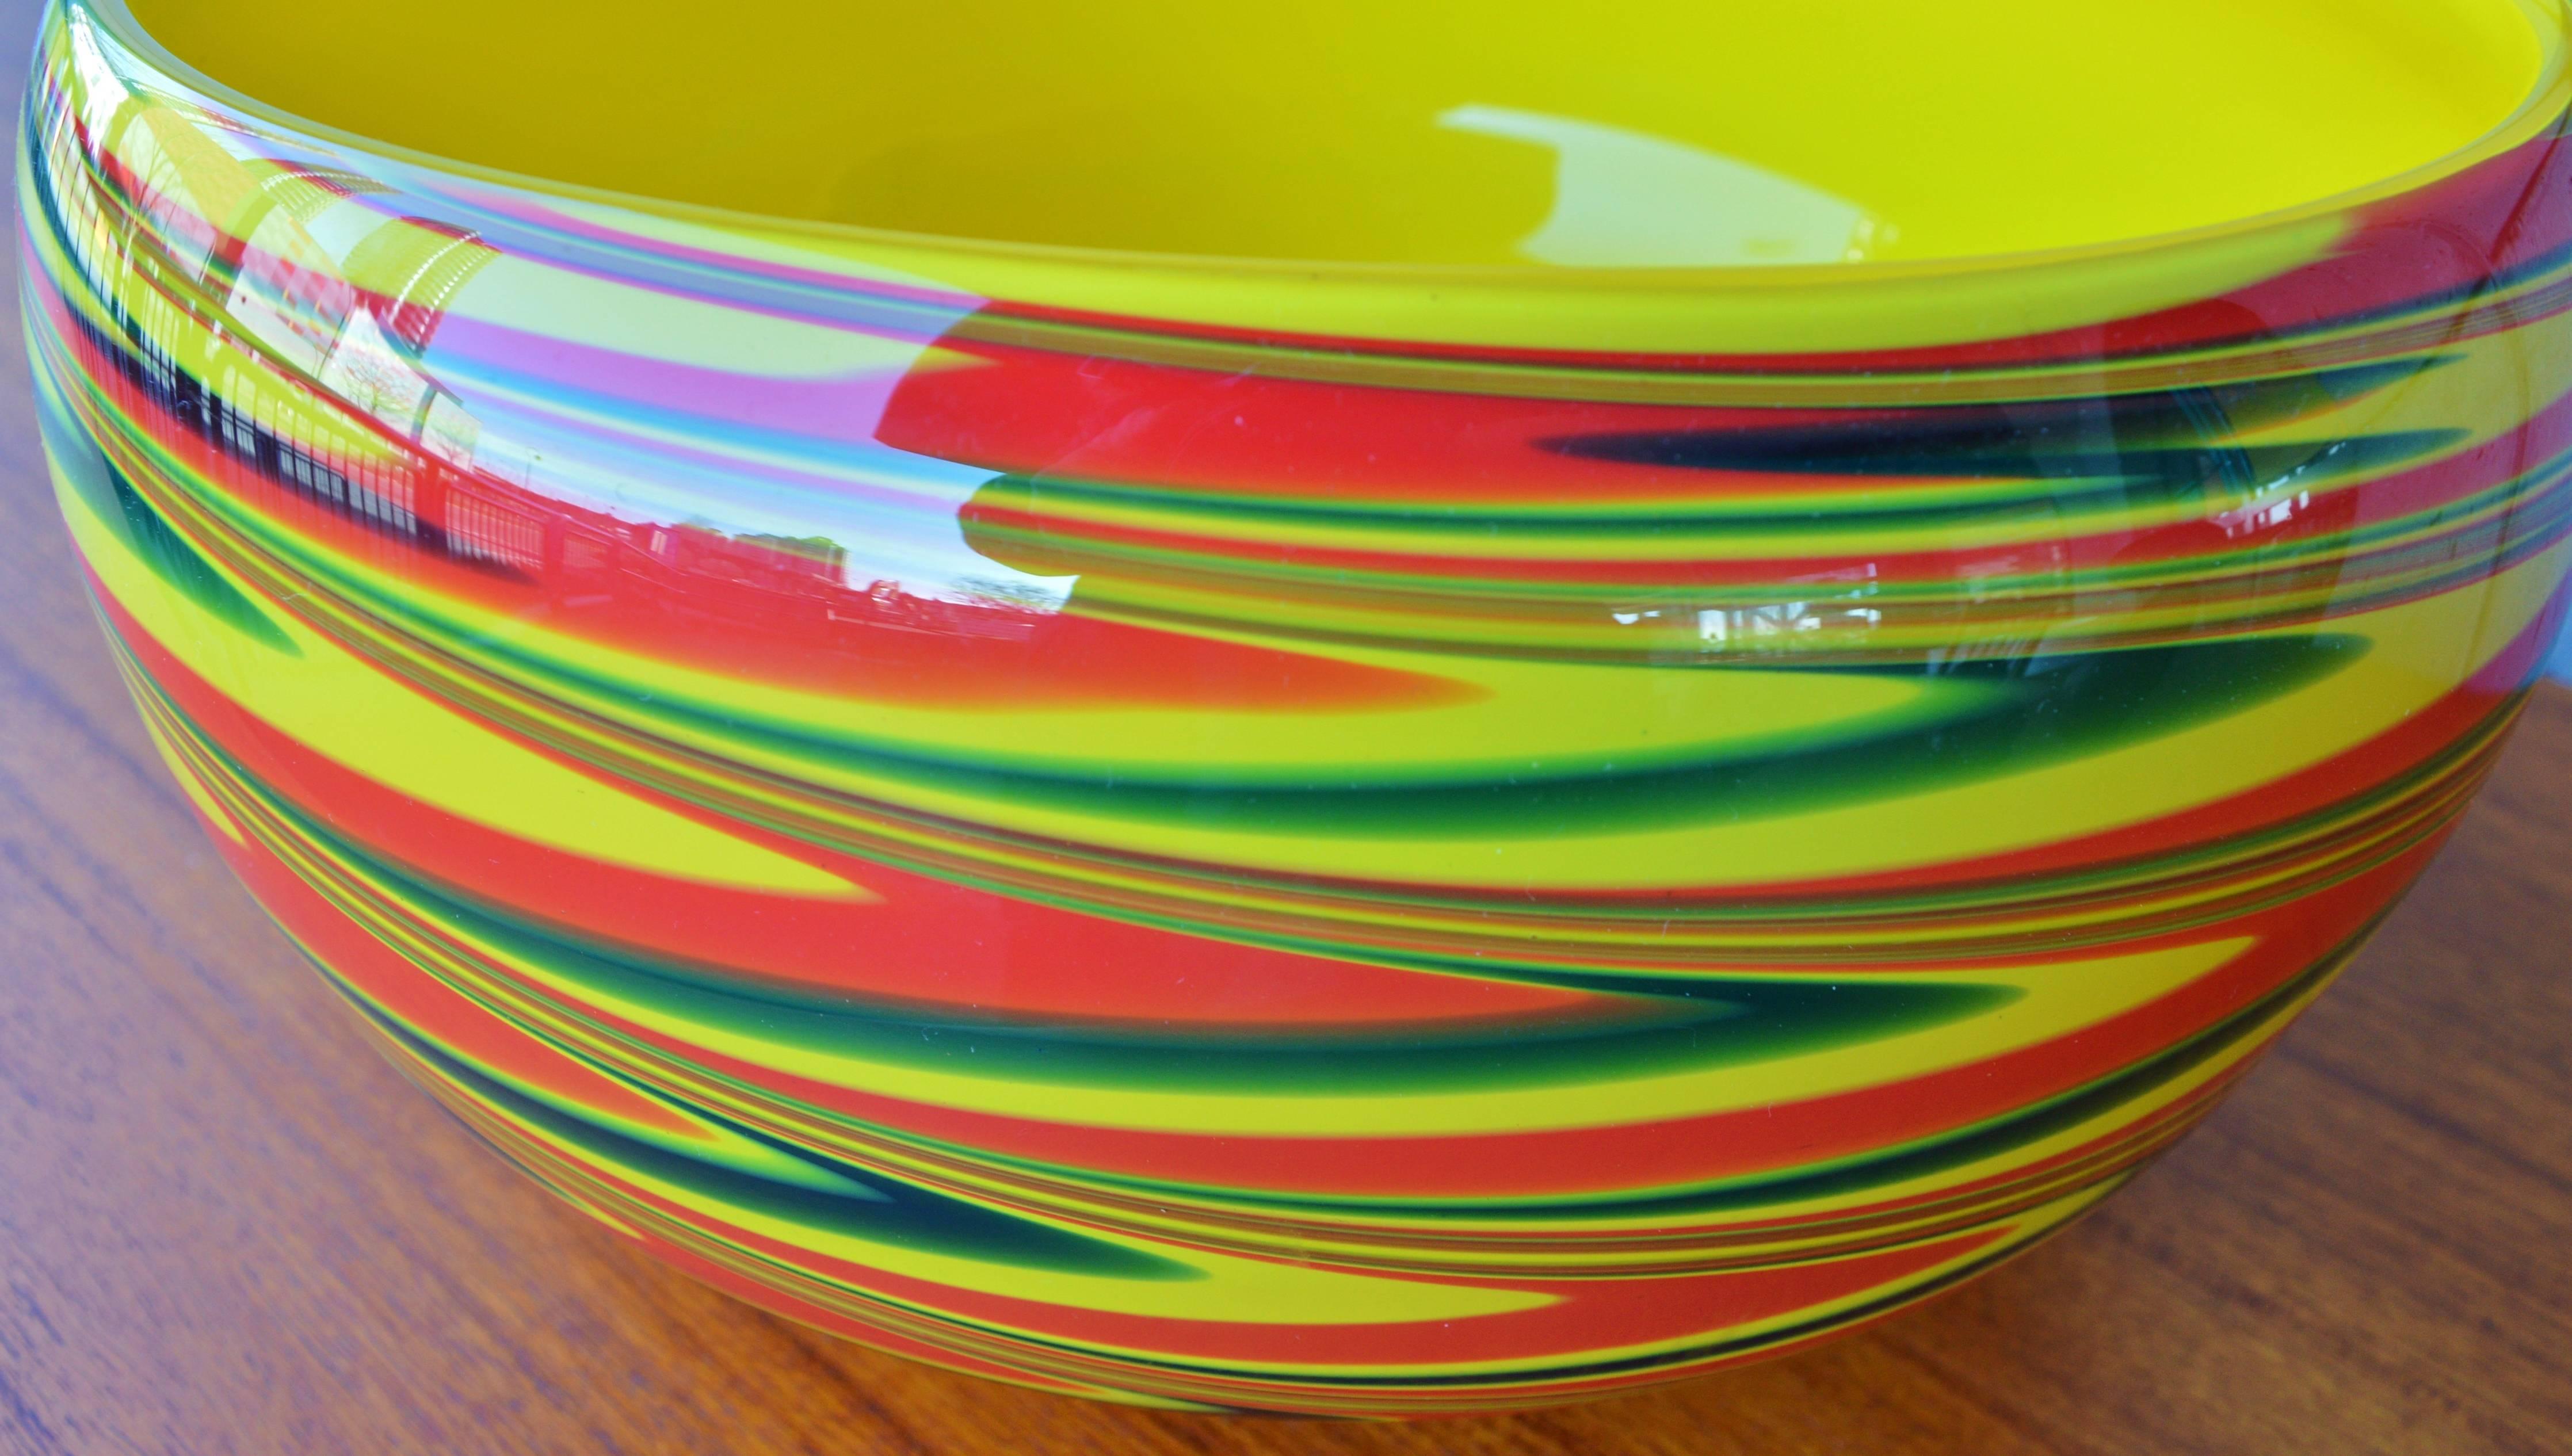 Large Dramatic Murano Cased Glass Swirl Bowl in Yellow, Red and Green In Excellent Condition For Sale In New Westminster, British Columbia